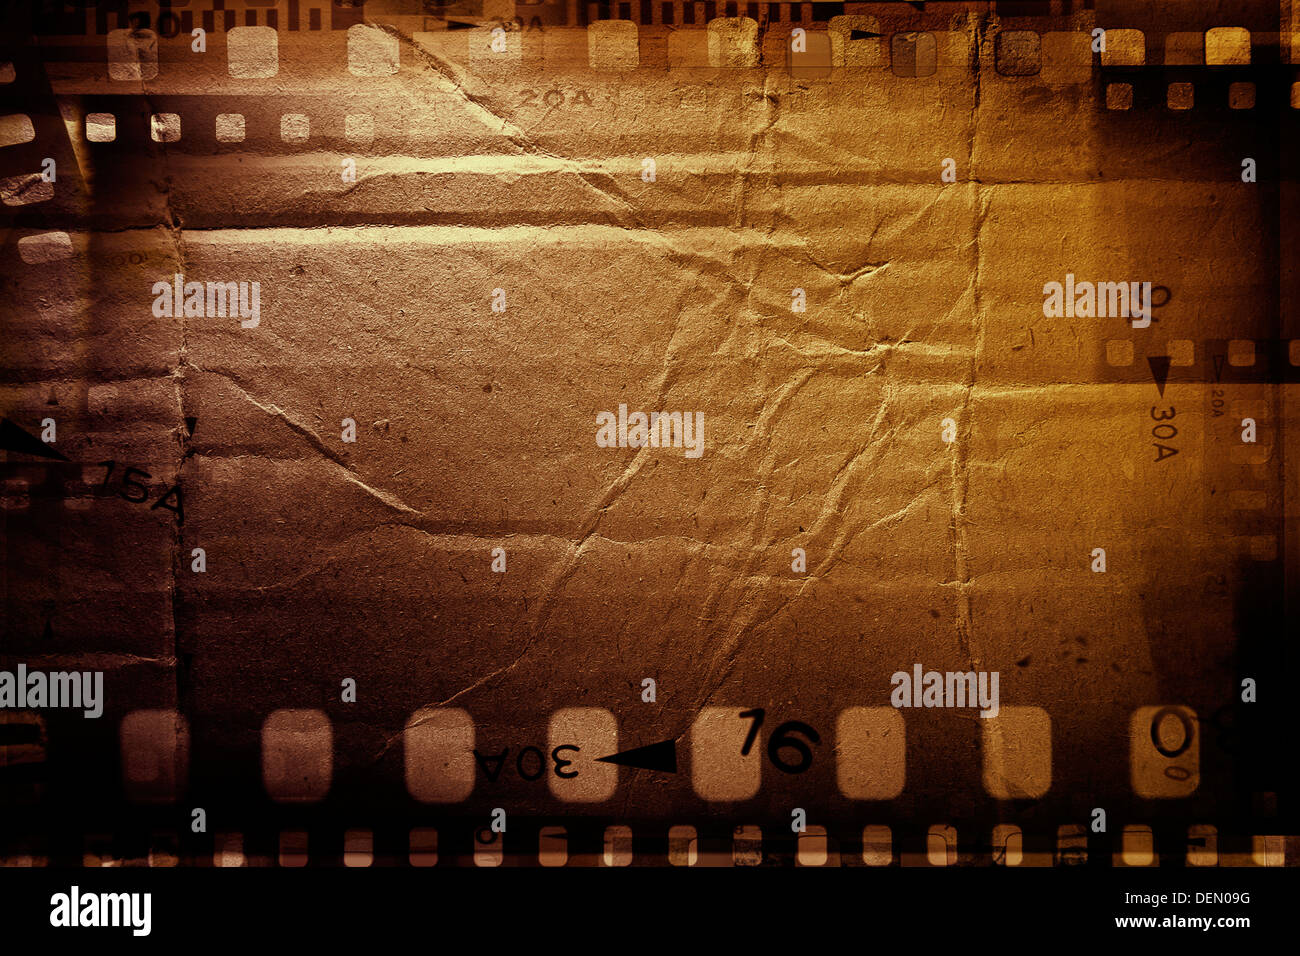 Film strips and grunge paper texture Stock Photo